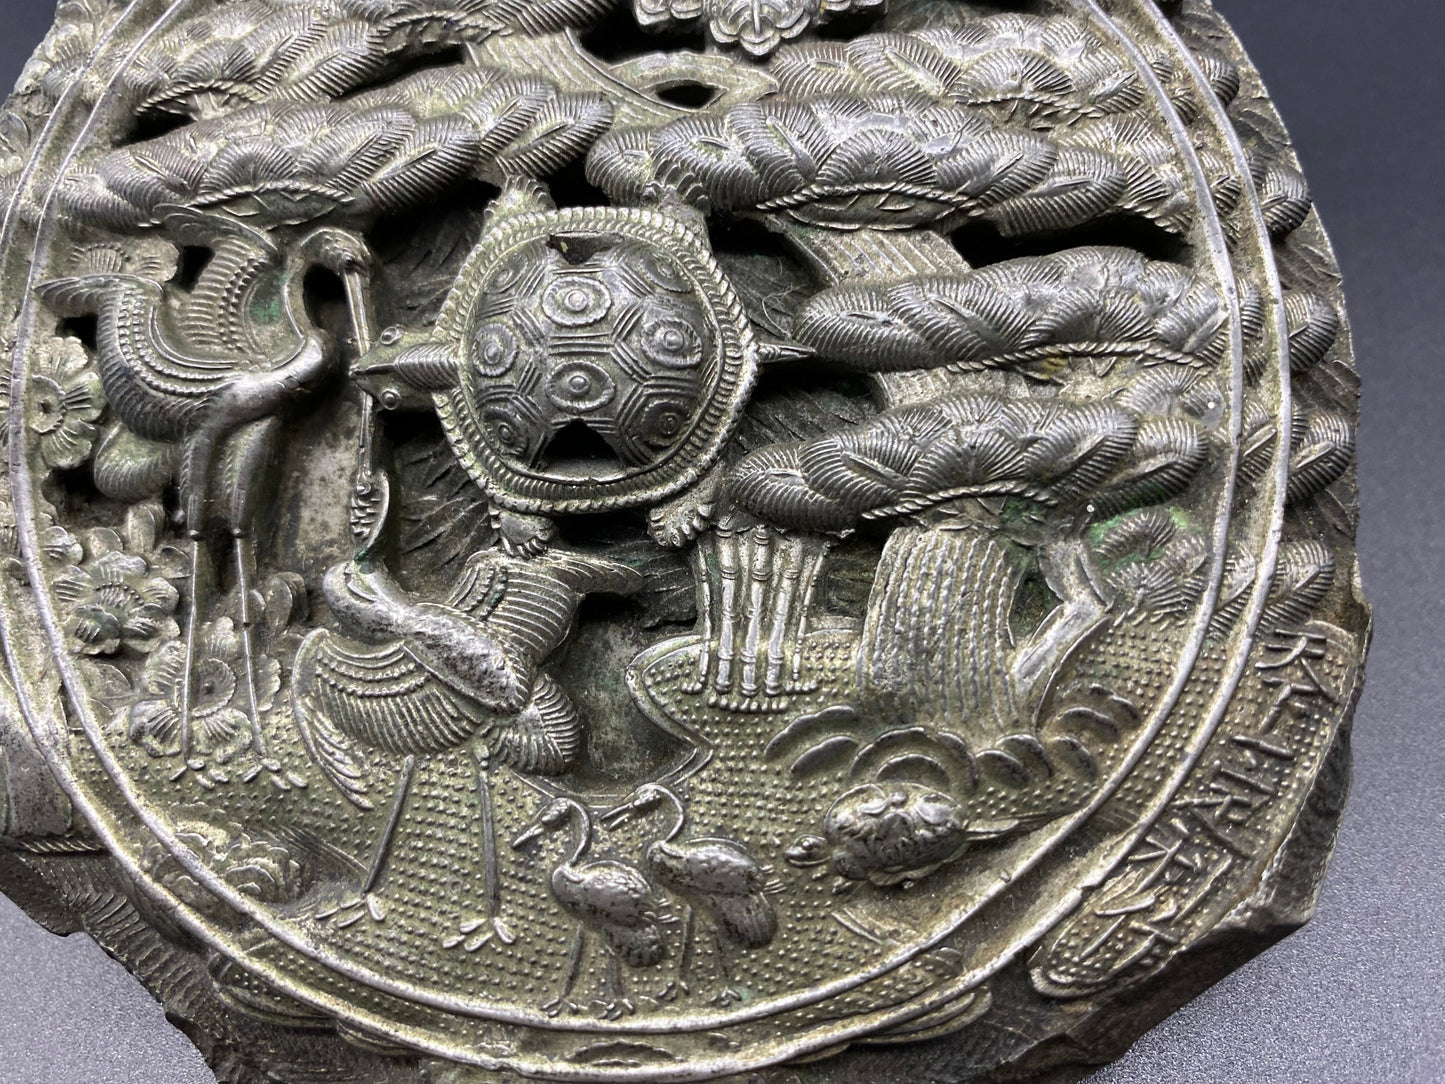 RARE Heavy and Finely Cast Japanese Bronze Mirror Edo Period, 18th Century, Japan. ANTIQUES & COLLECTABLES USA 